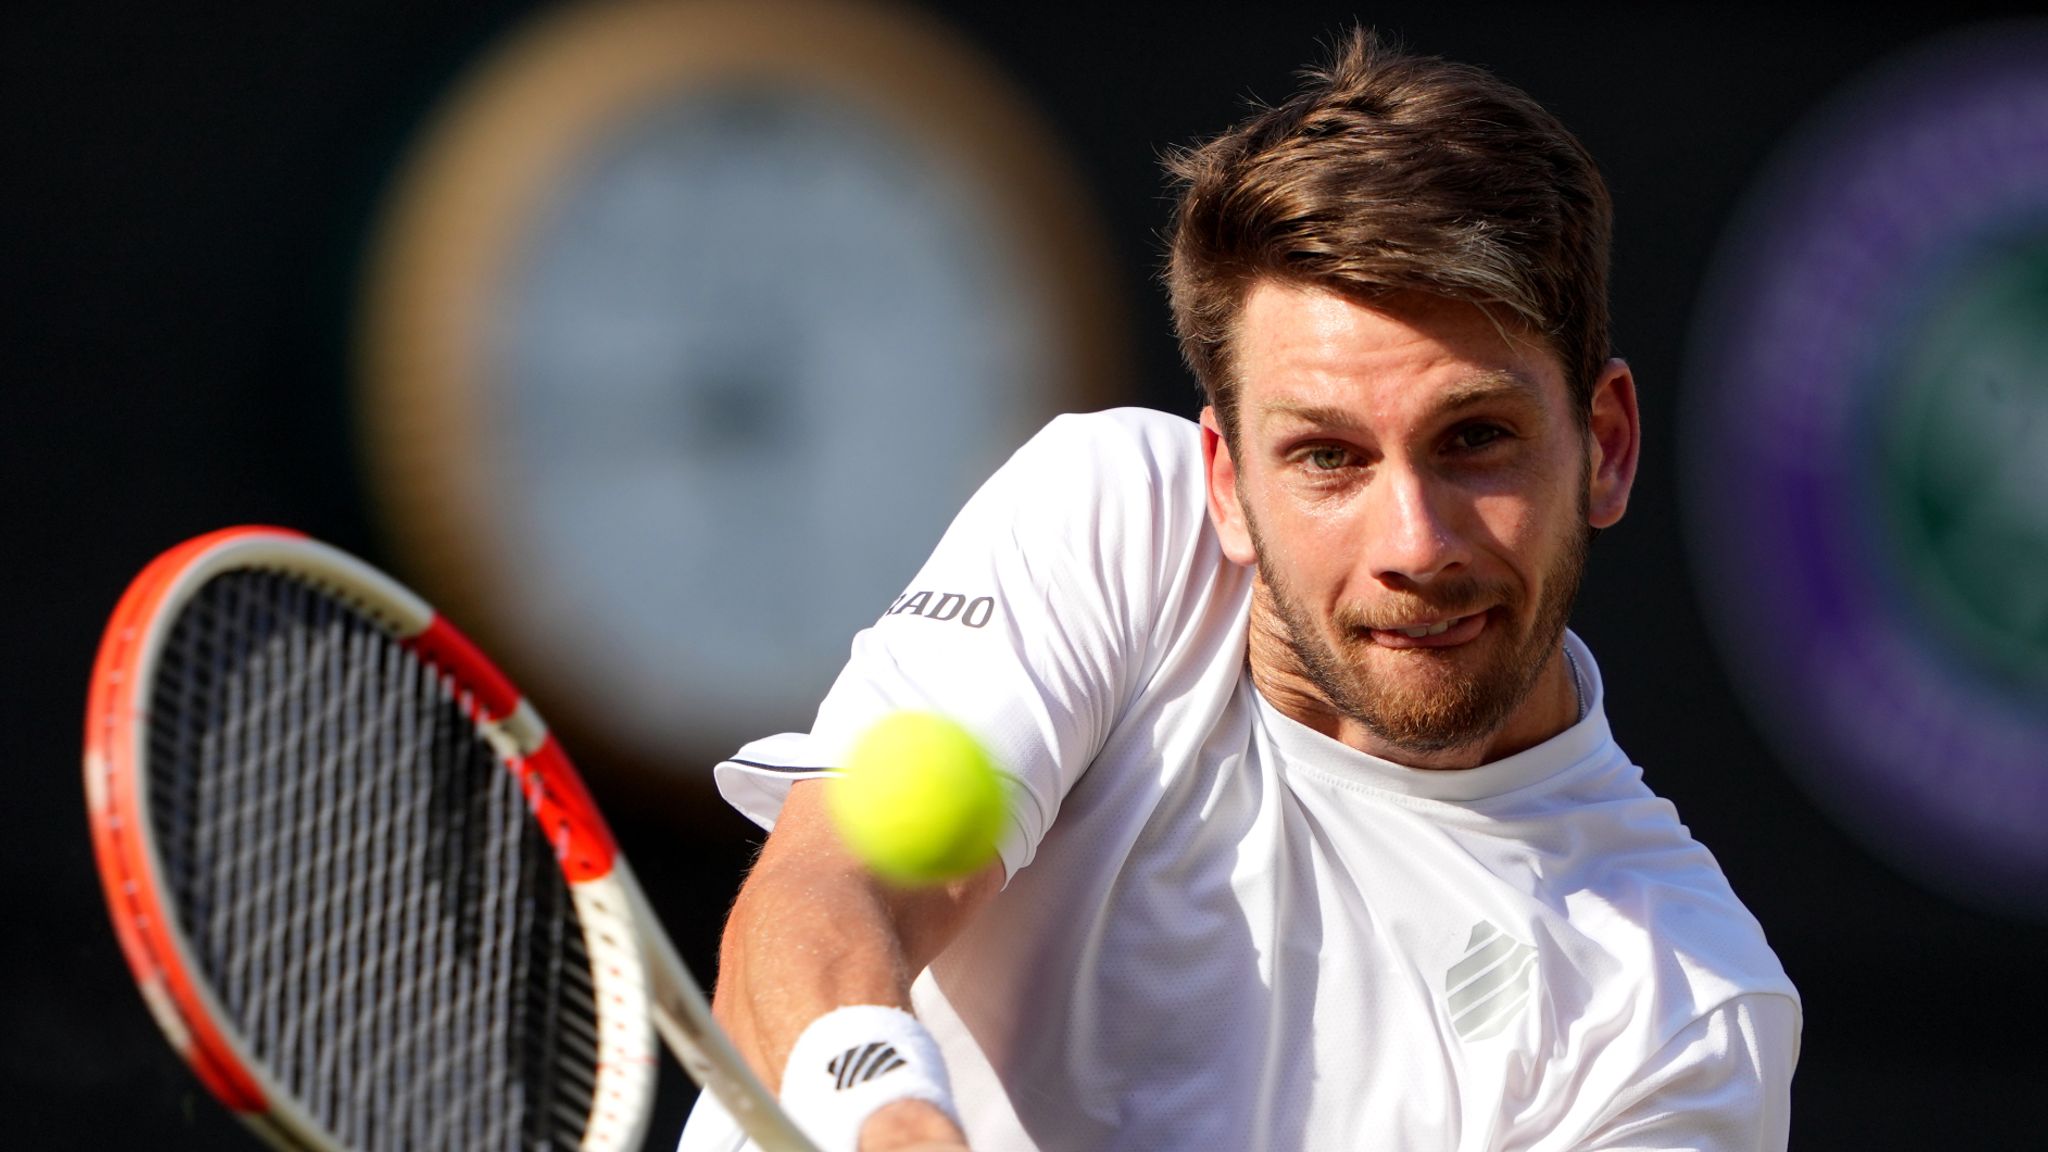 Cameron Norries Lyon Open title defence ended by Francisco Cerundolo Tennis News Sky Sports